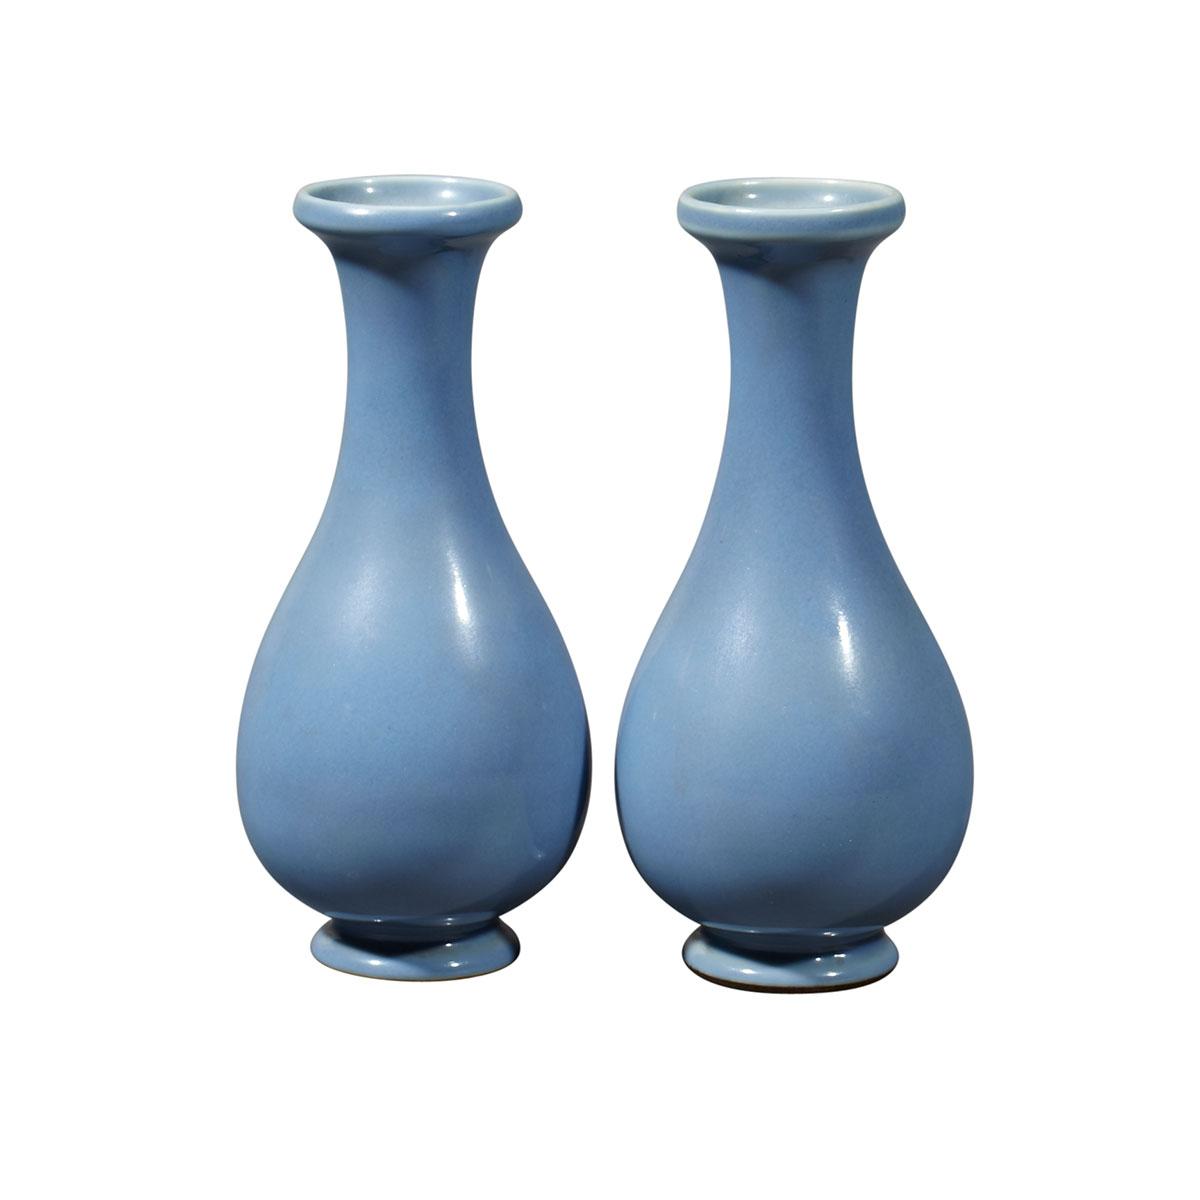 Pair of Blue Ground Bottle Vases, Late Qing Dynasty